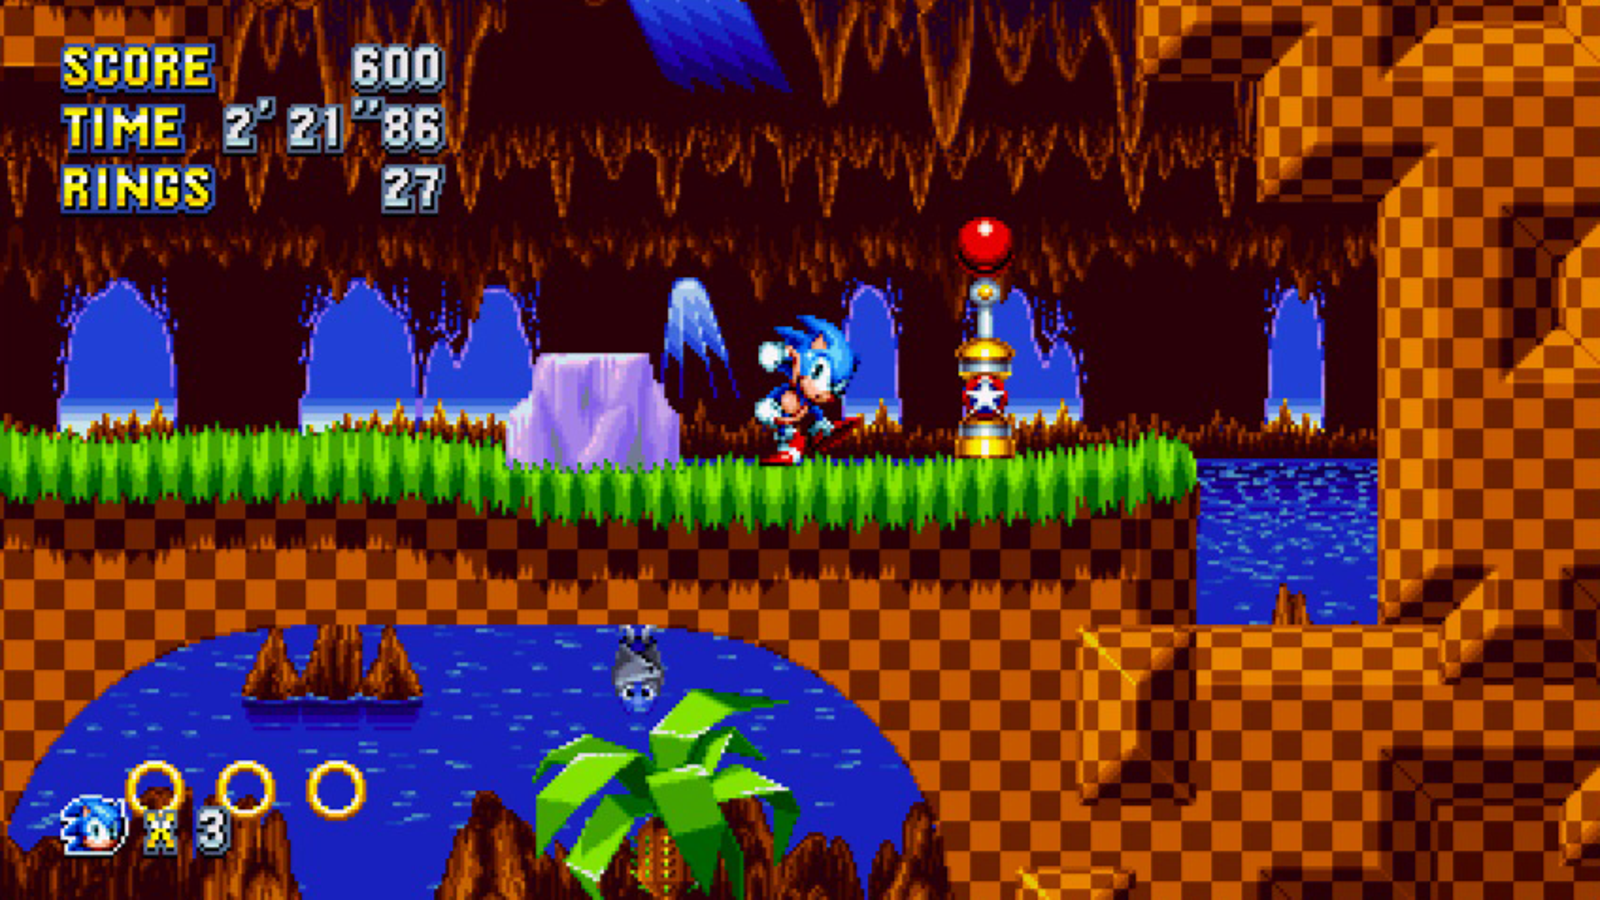 How to get Super Sonic - The classic Sonic the Hedgehog 2 cheat